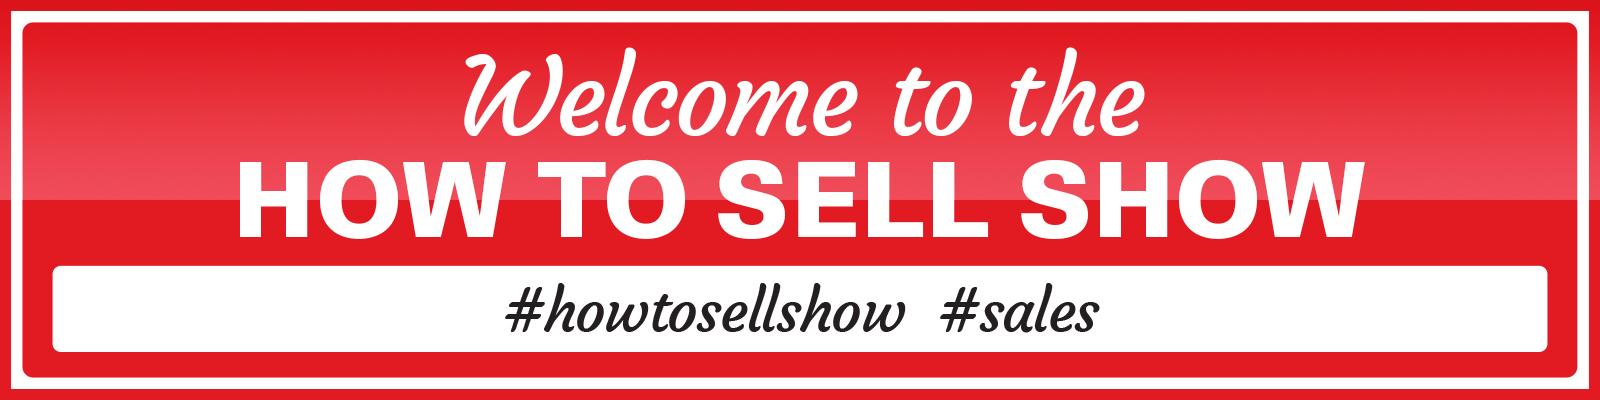 How To Sell Show